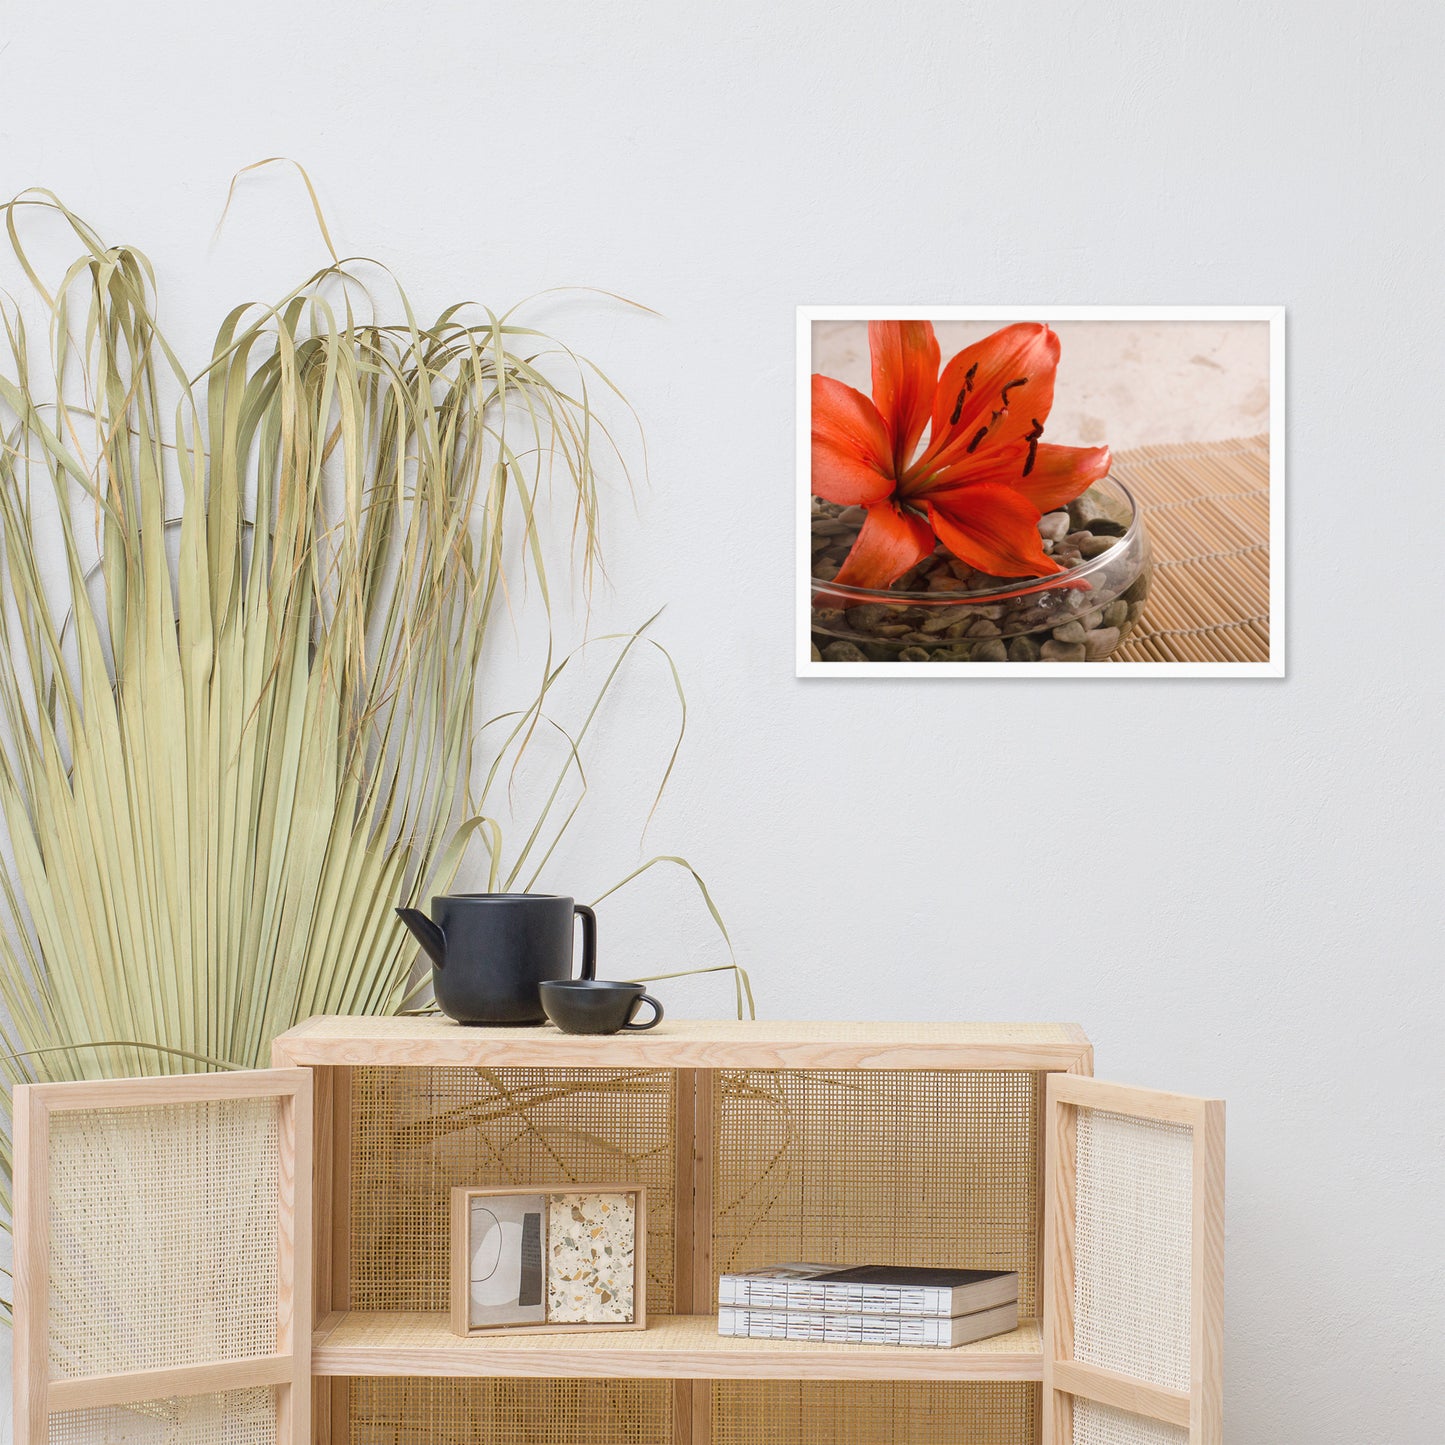 Tranquil Lily Floral Nature Photo Framed Wall Art Print